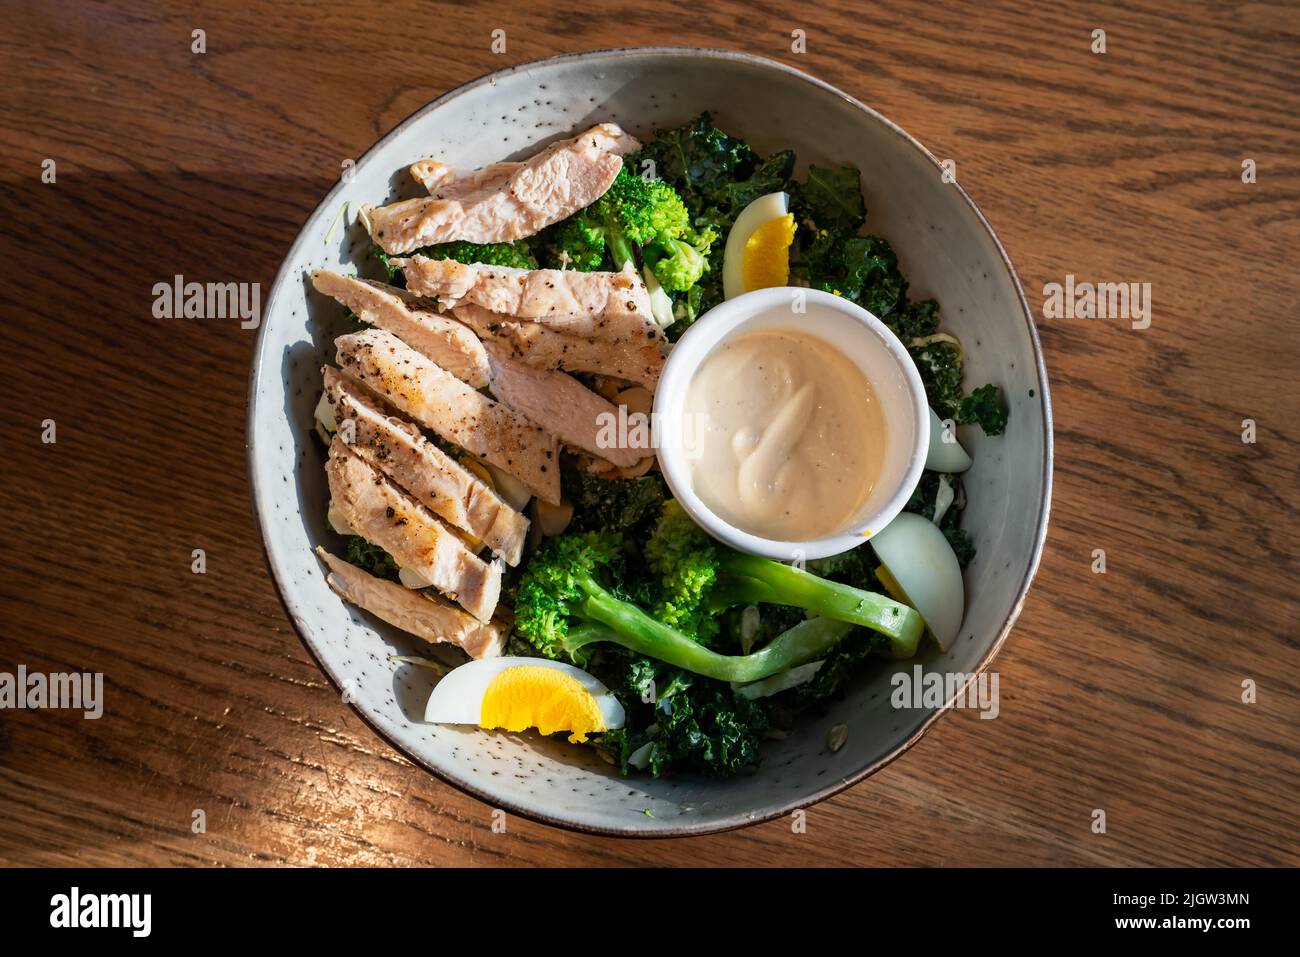 Mixed salad dish with chicken meat eggs and broccoli on a wooden table Stock Photo